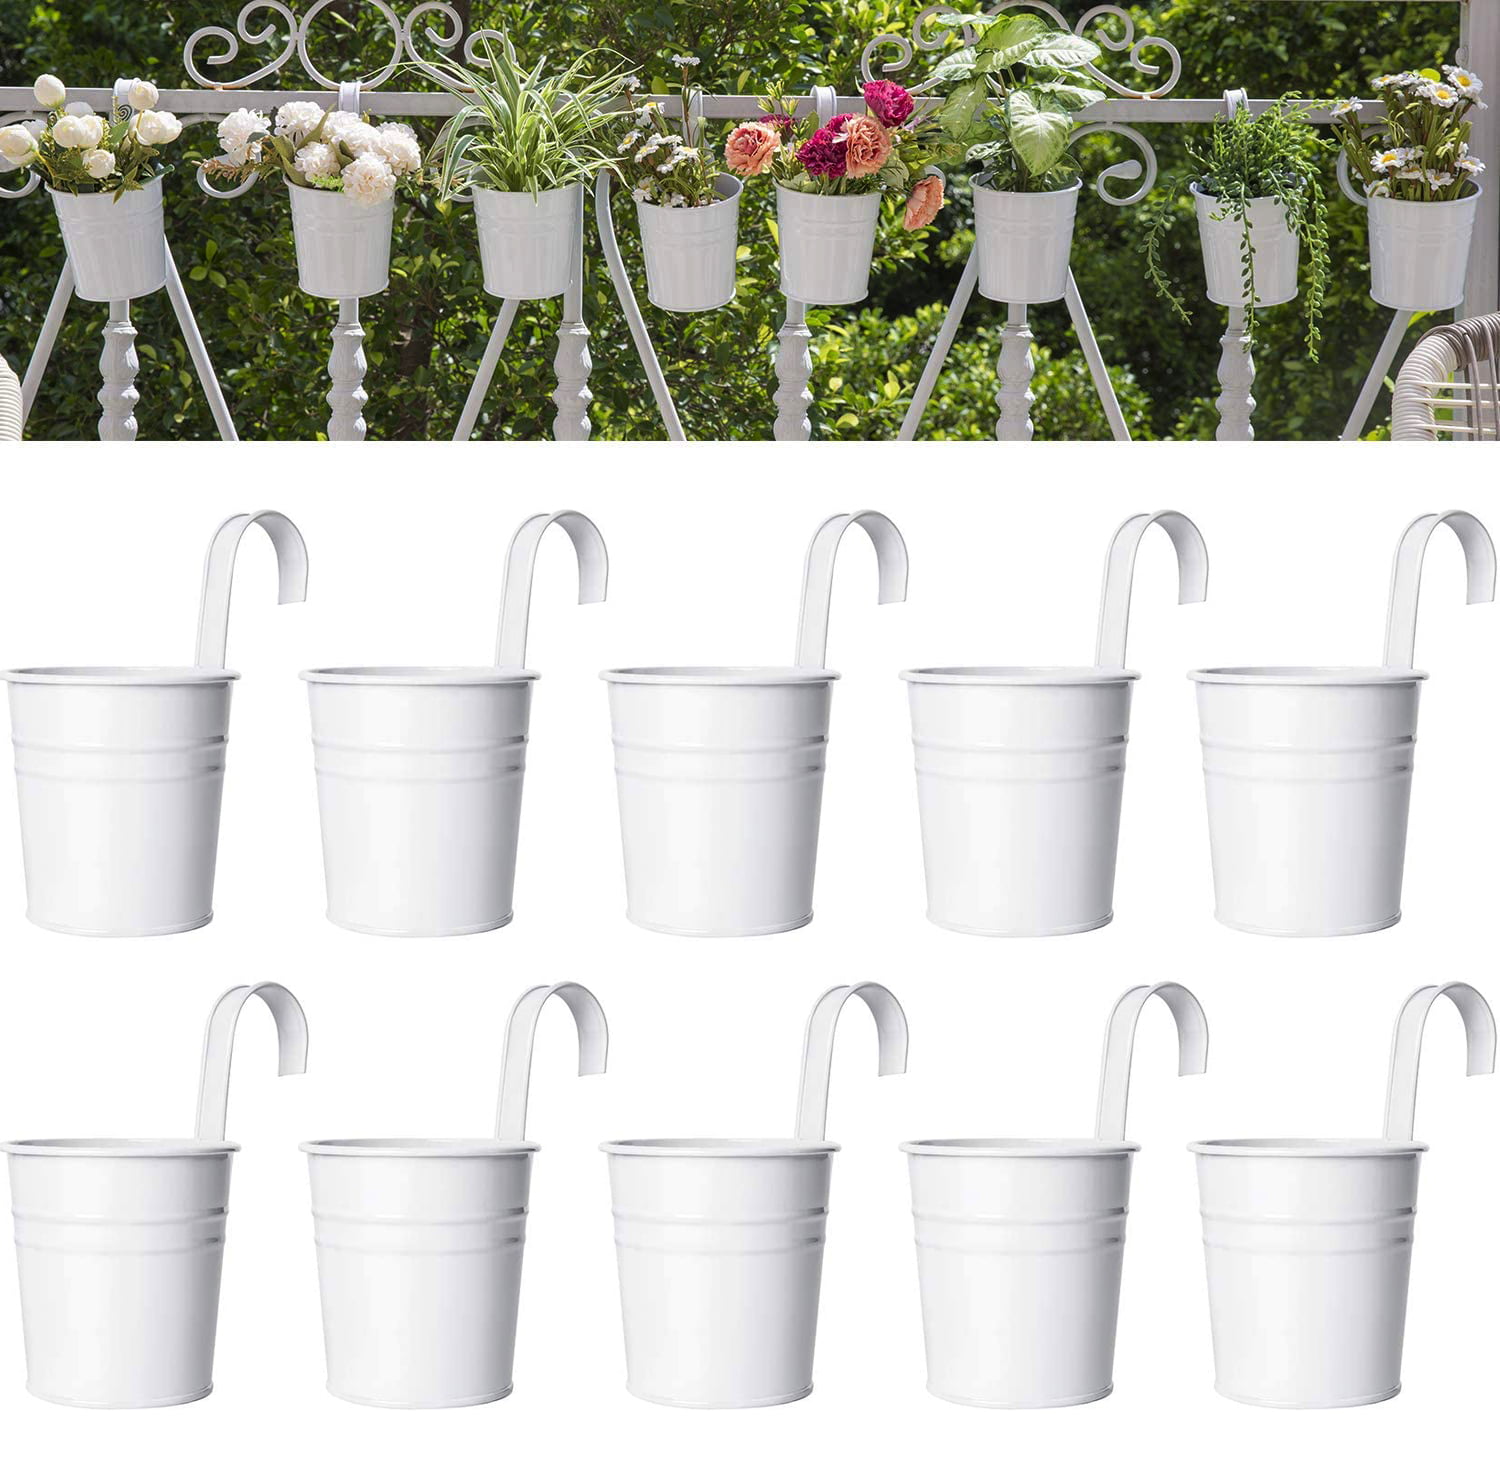 10 Pcs 10 cm Metal Flower Pots Colored Metal Hanging Plant Pots Fence Flower Pots Garden Hanging Flower holder without Drainage Hole